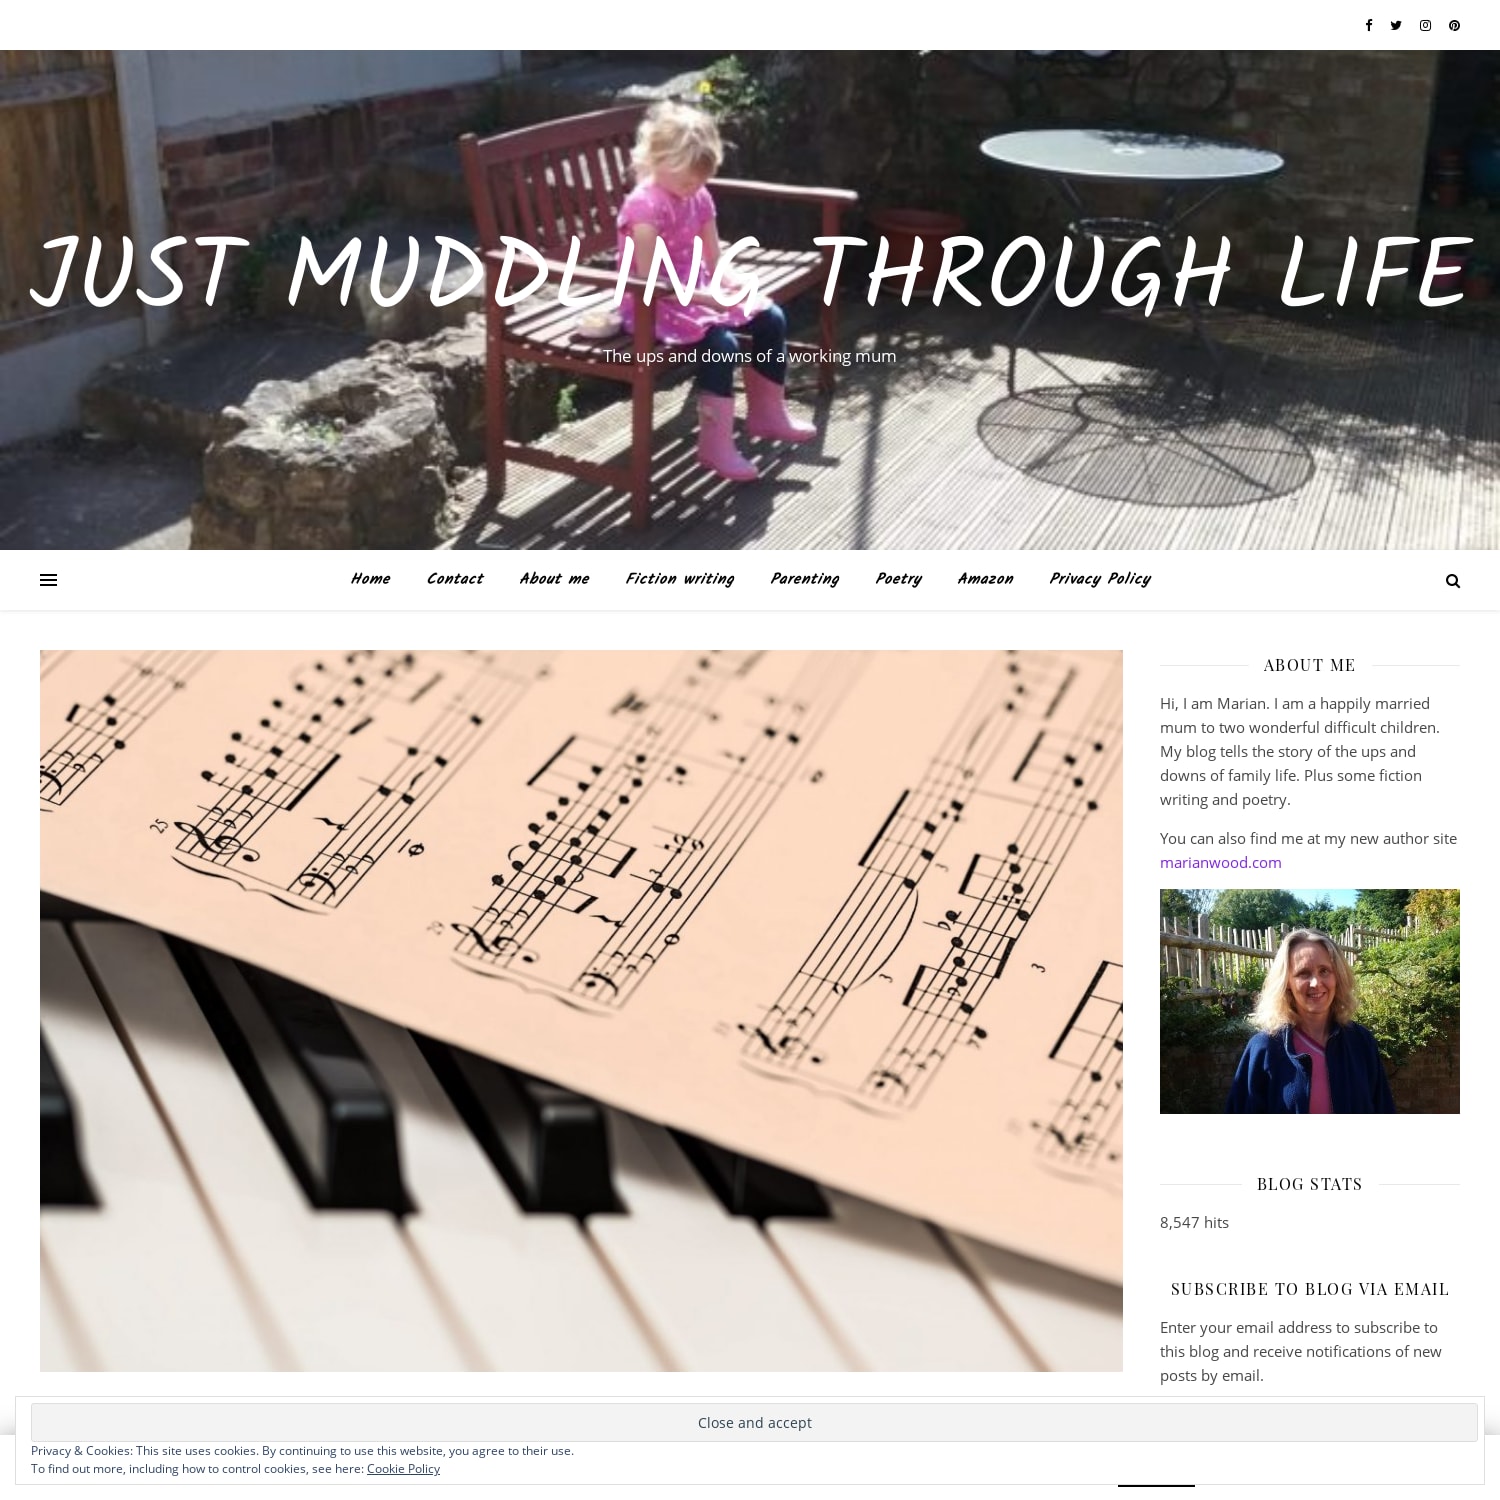 A keyboard and reflections from our weekend - Just muddling through life